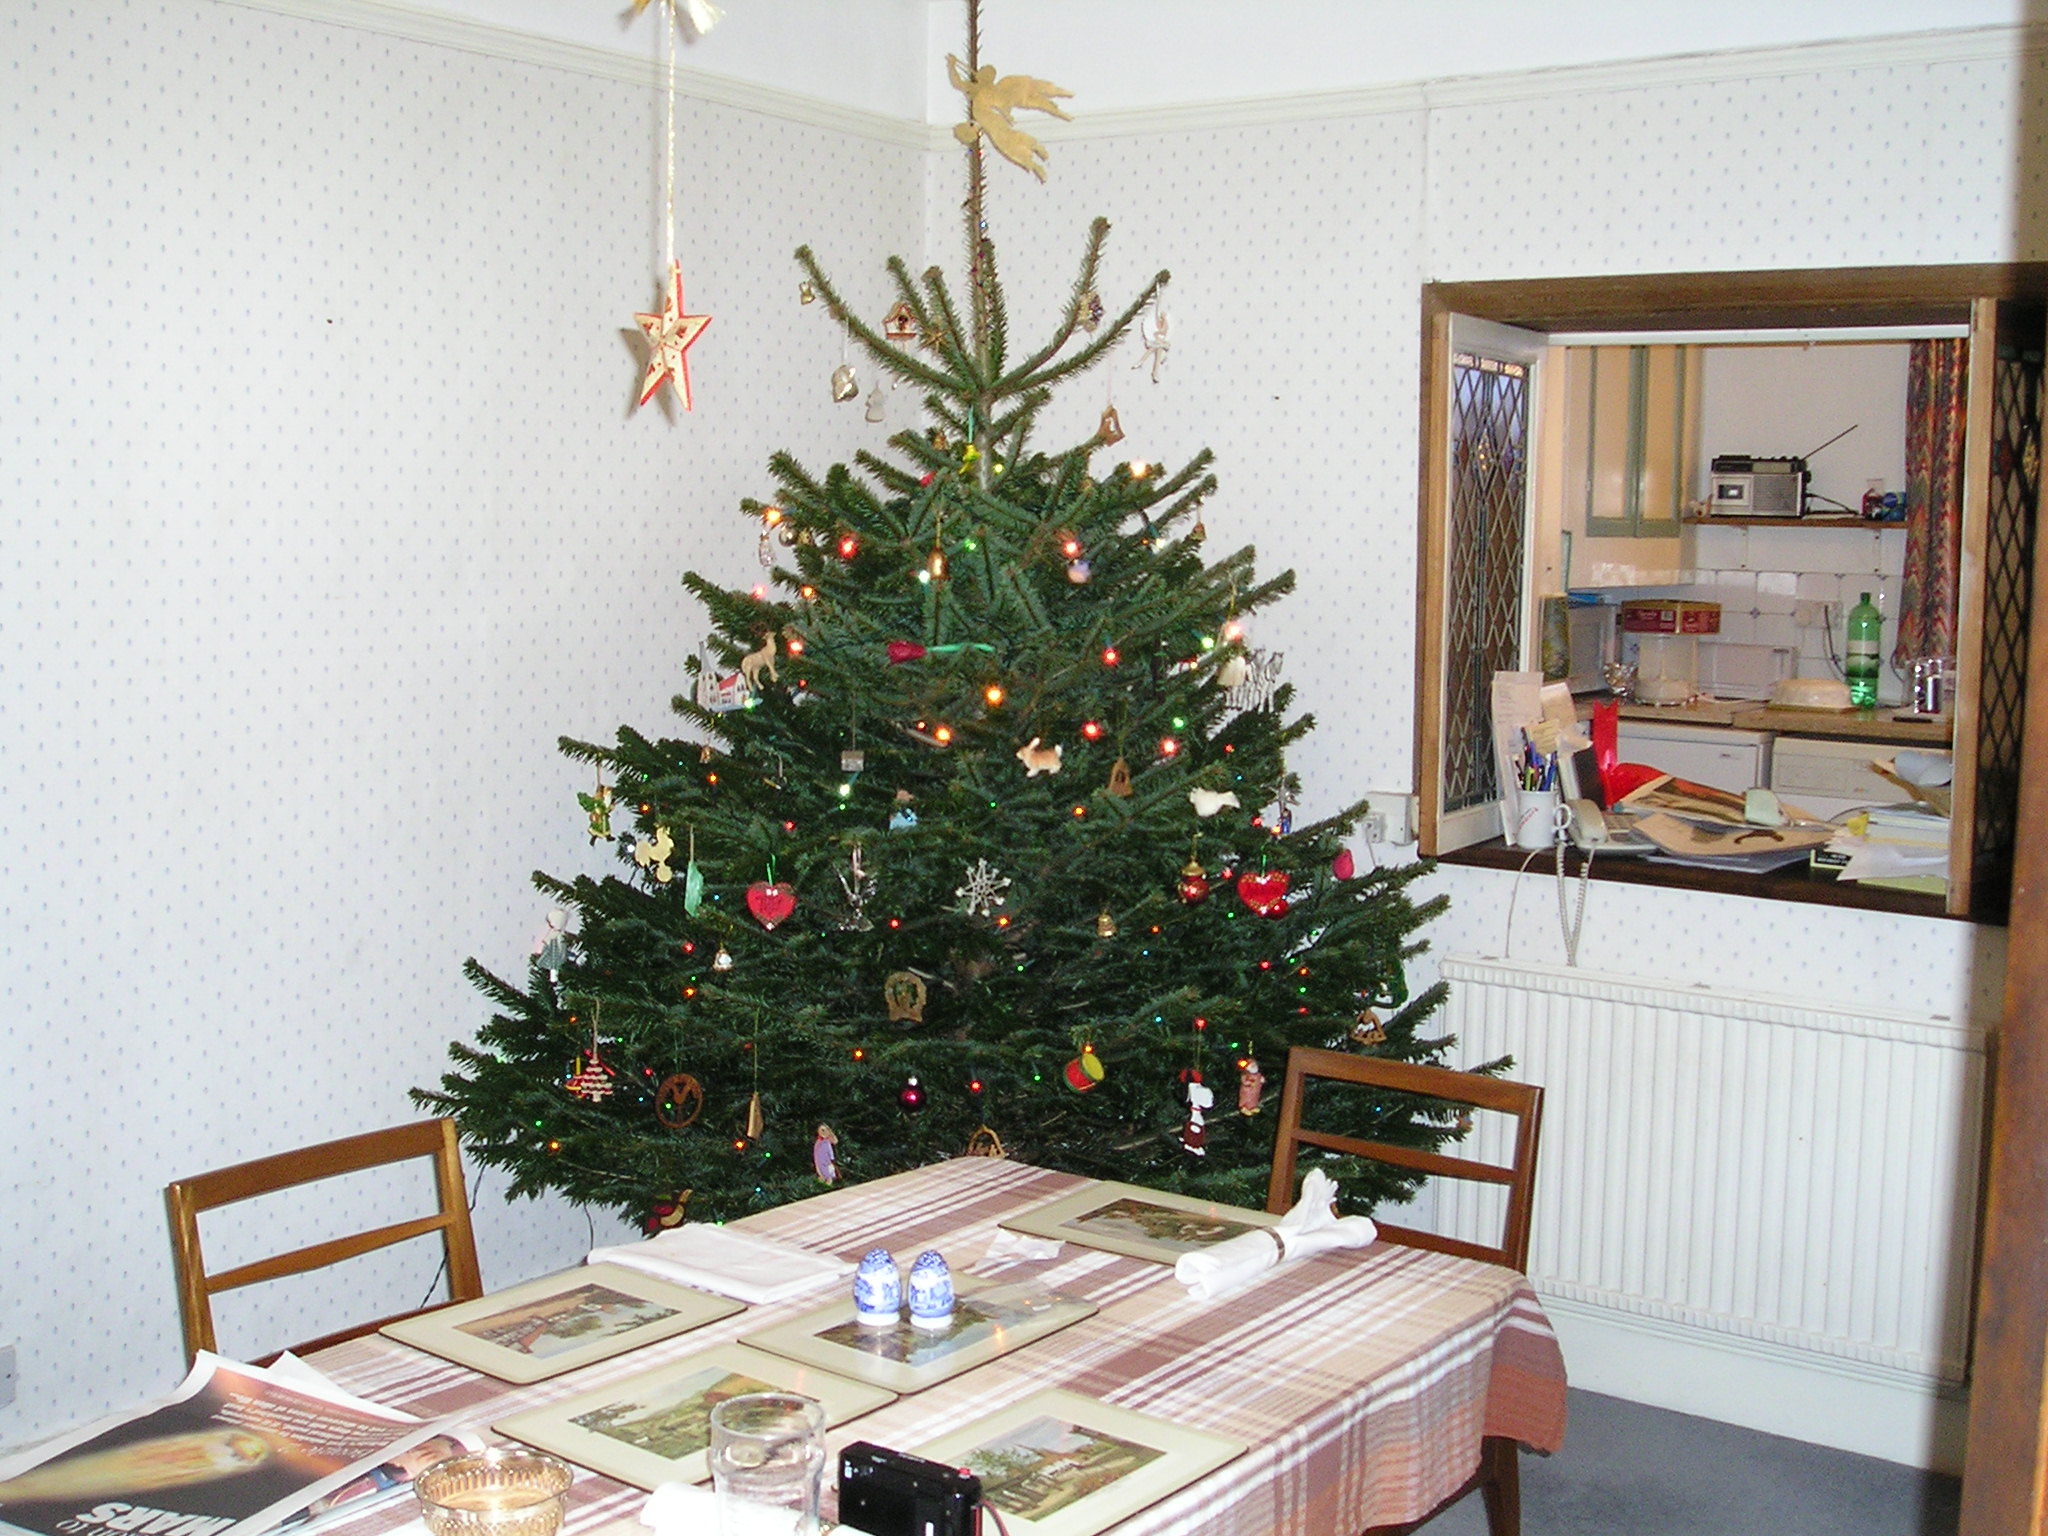 Dining Room with tree in corner